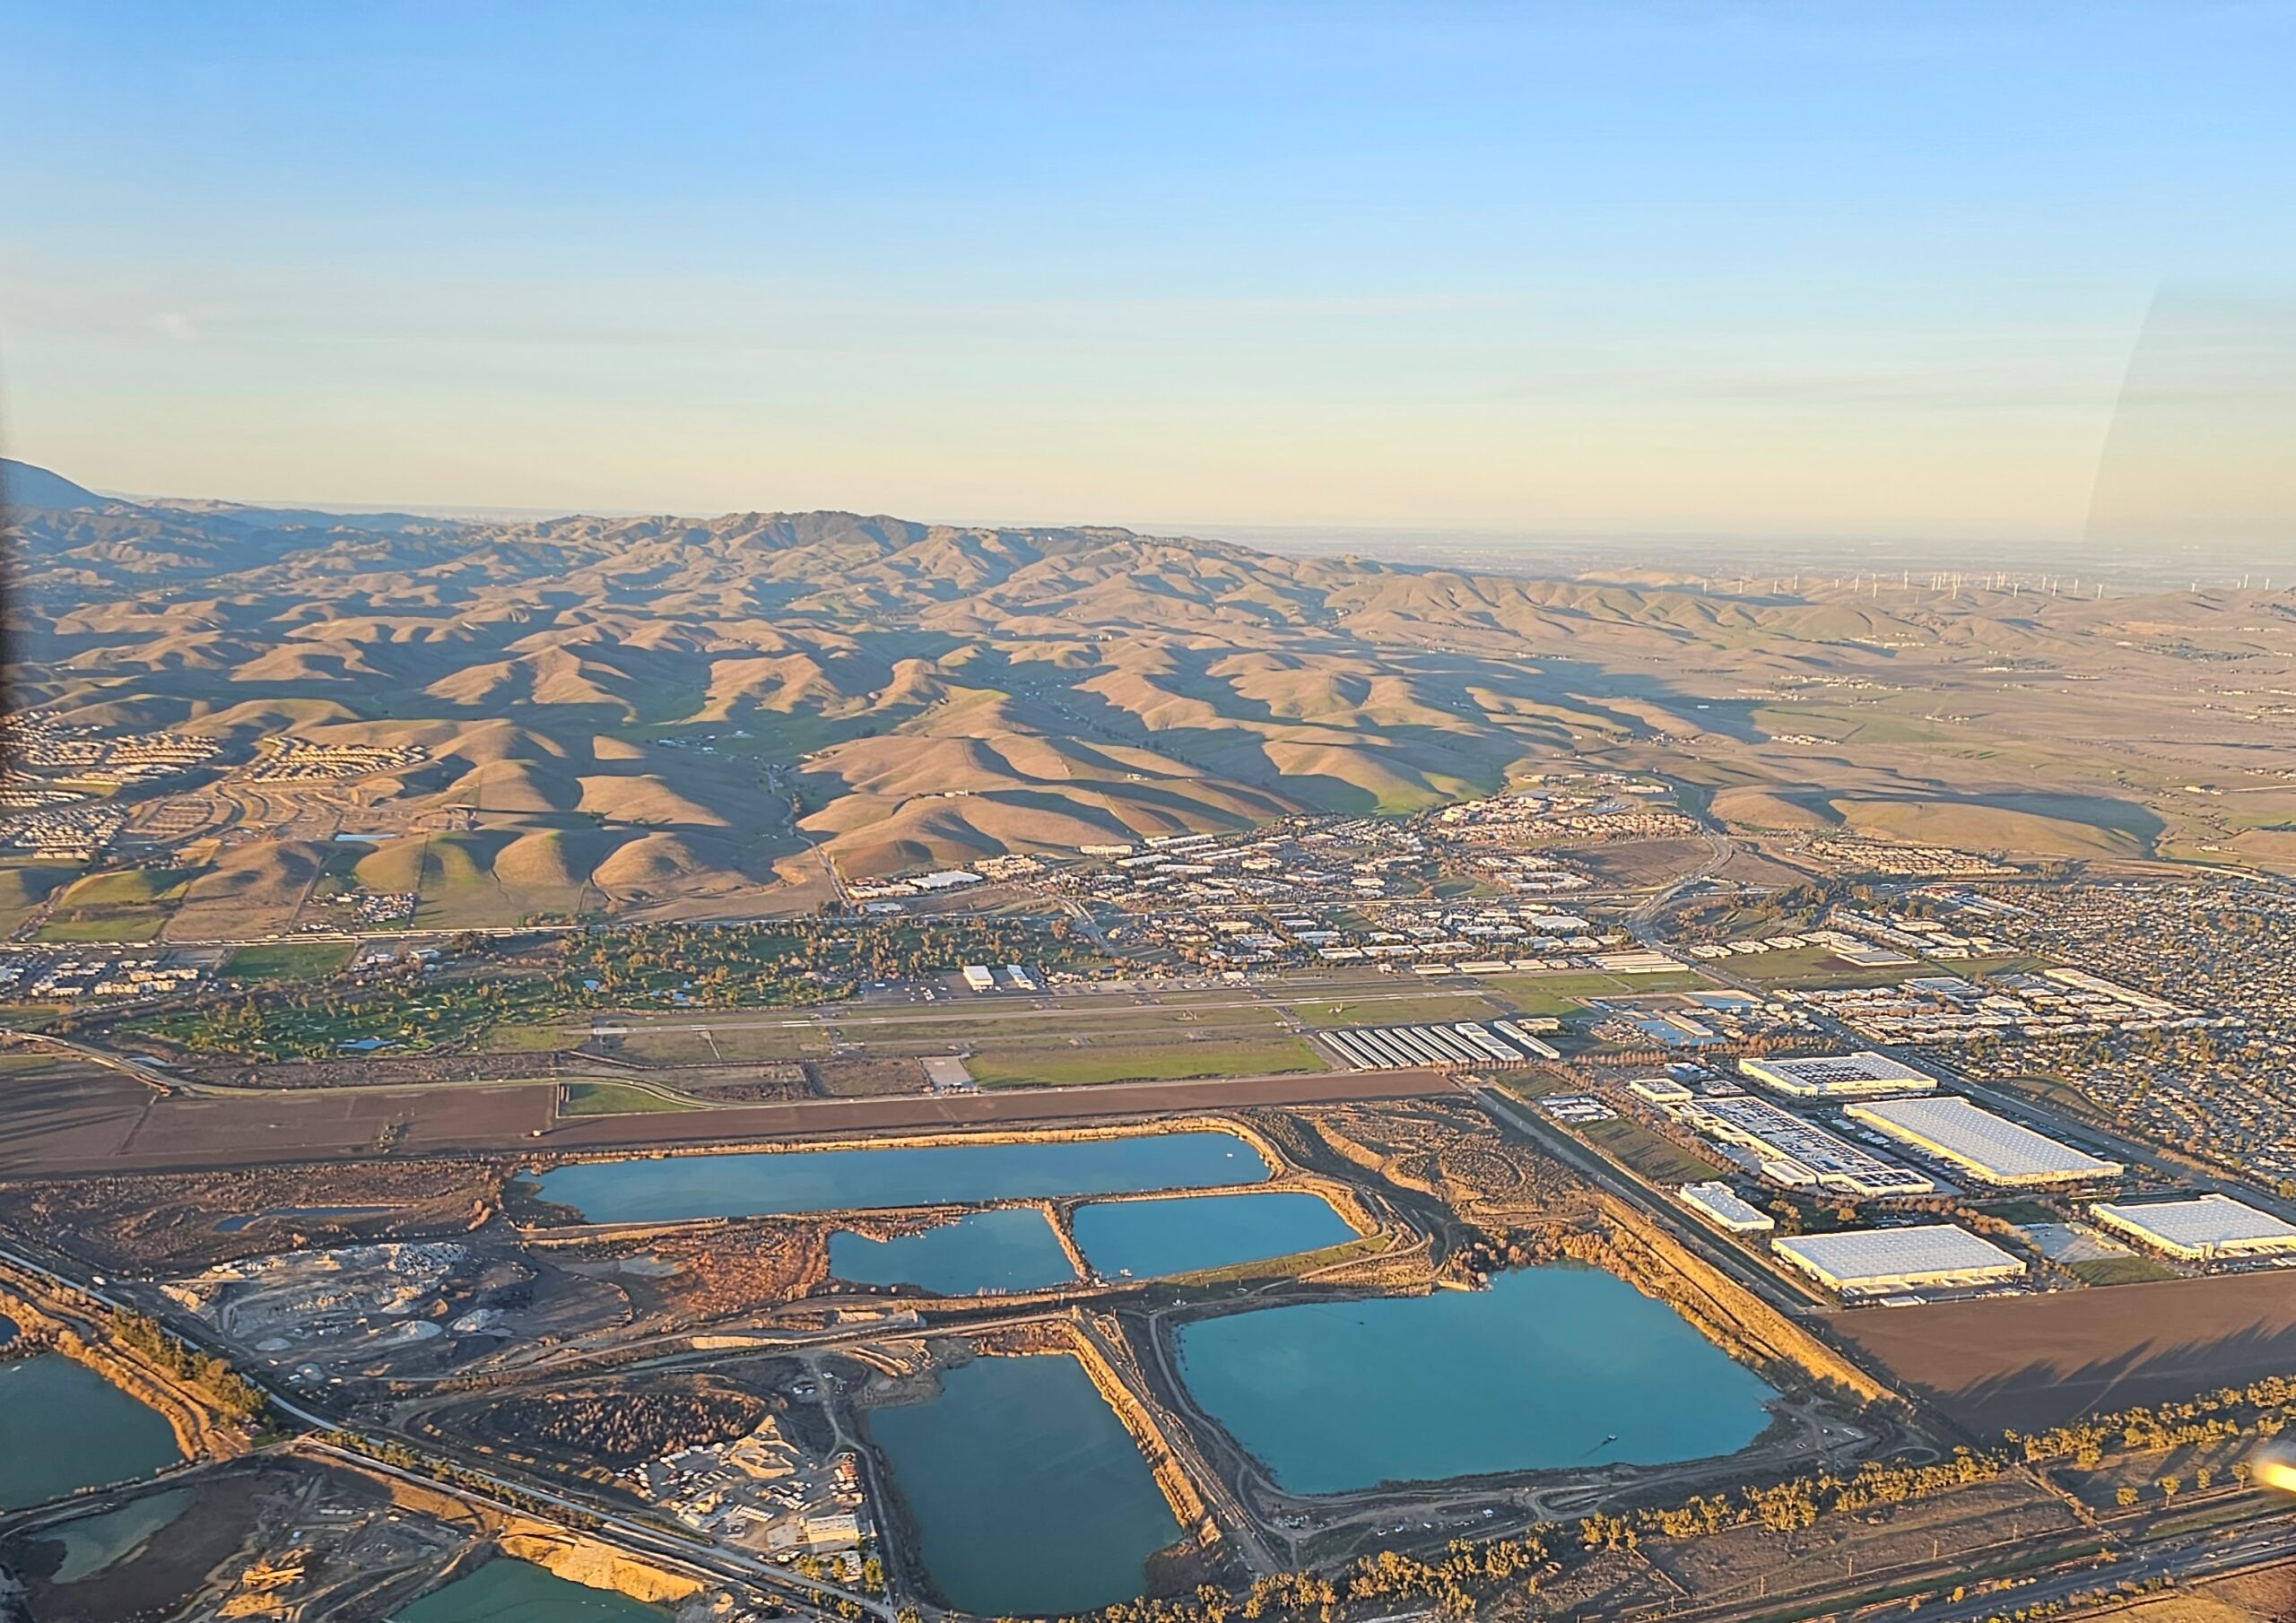 Starting operations at Livermore means that ZeroAvia has operations at two California airports